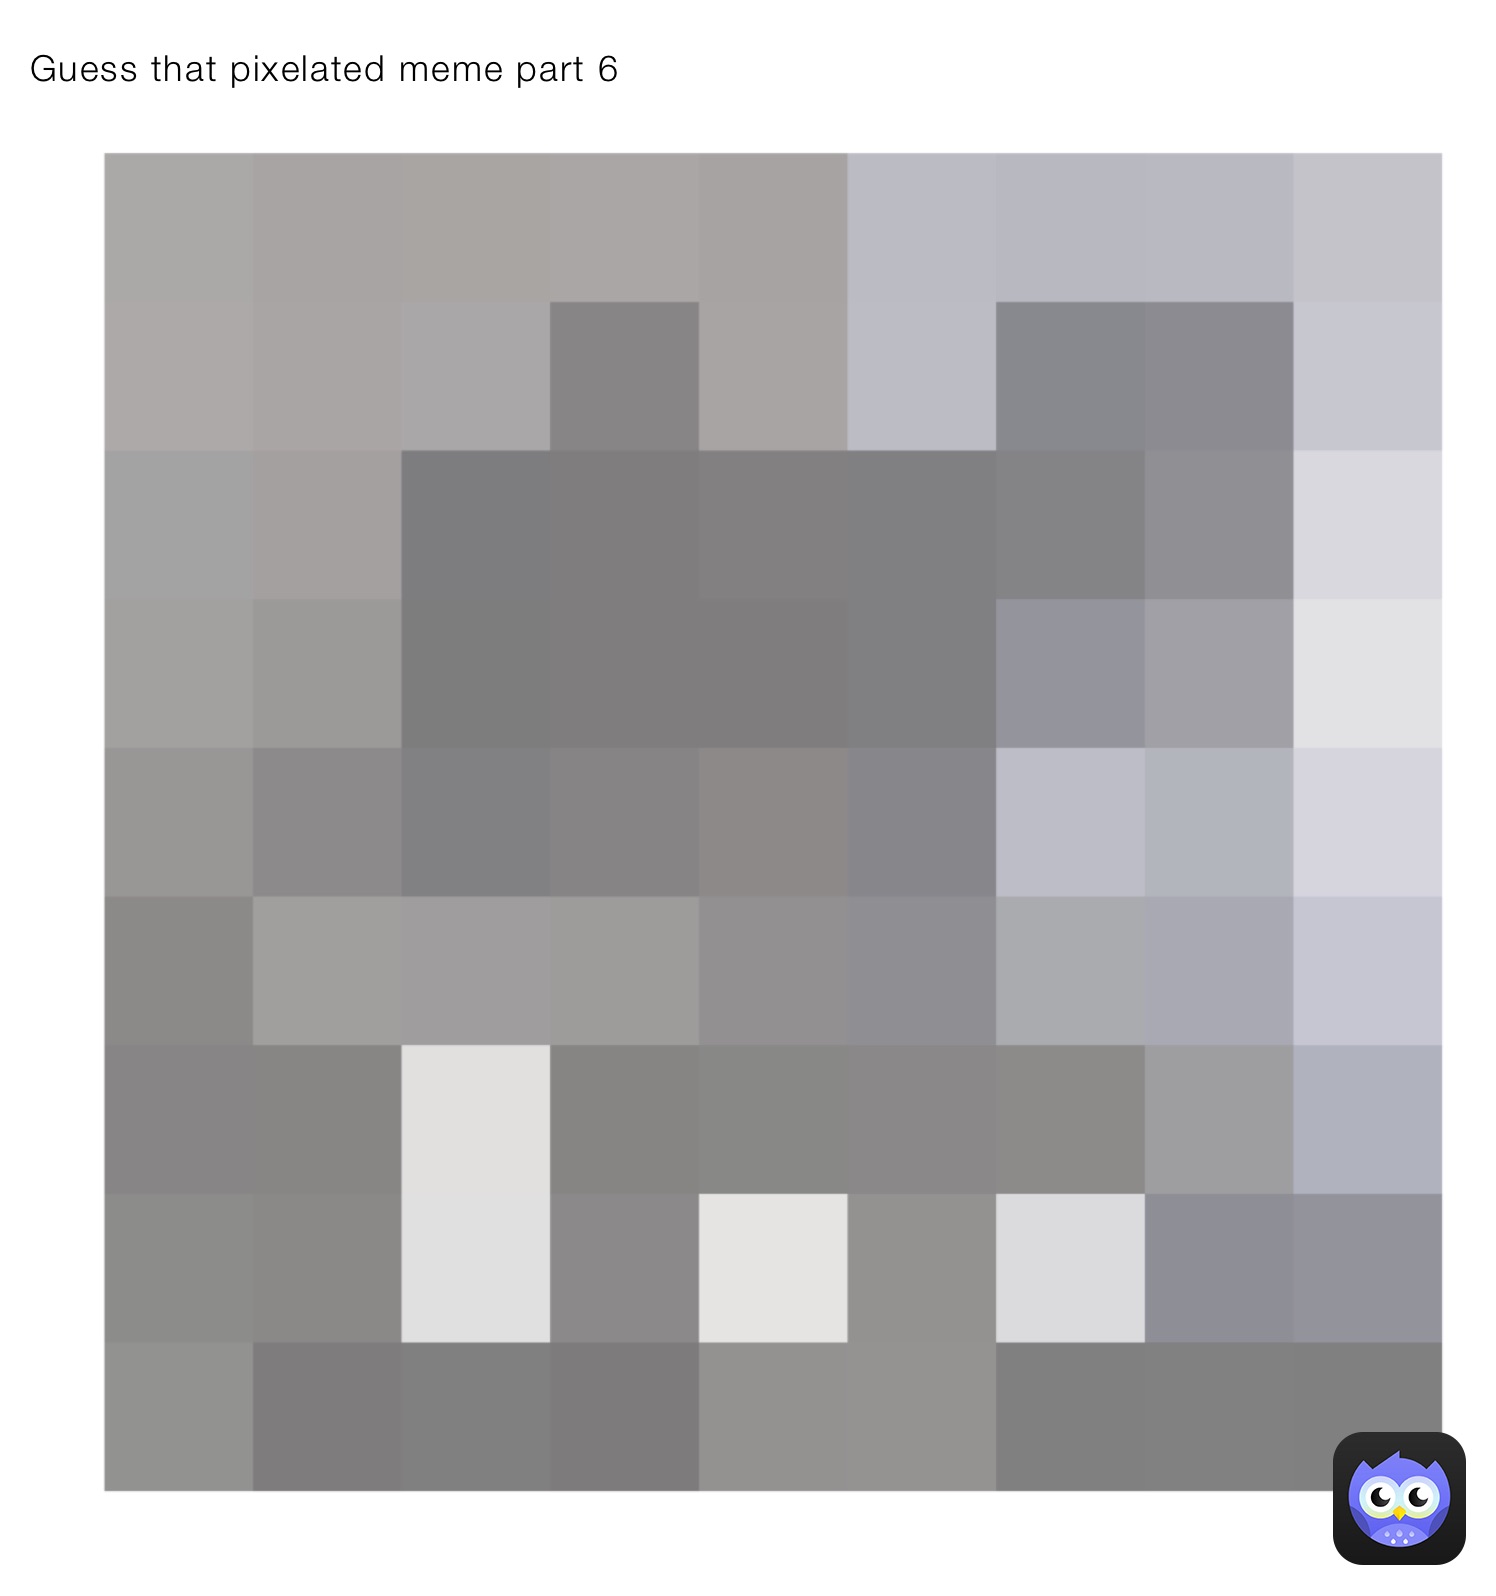 Guess that pixelated meme part 6